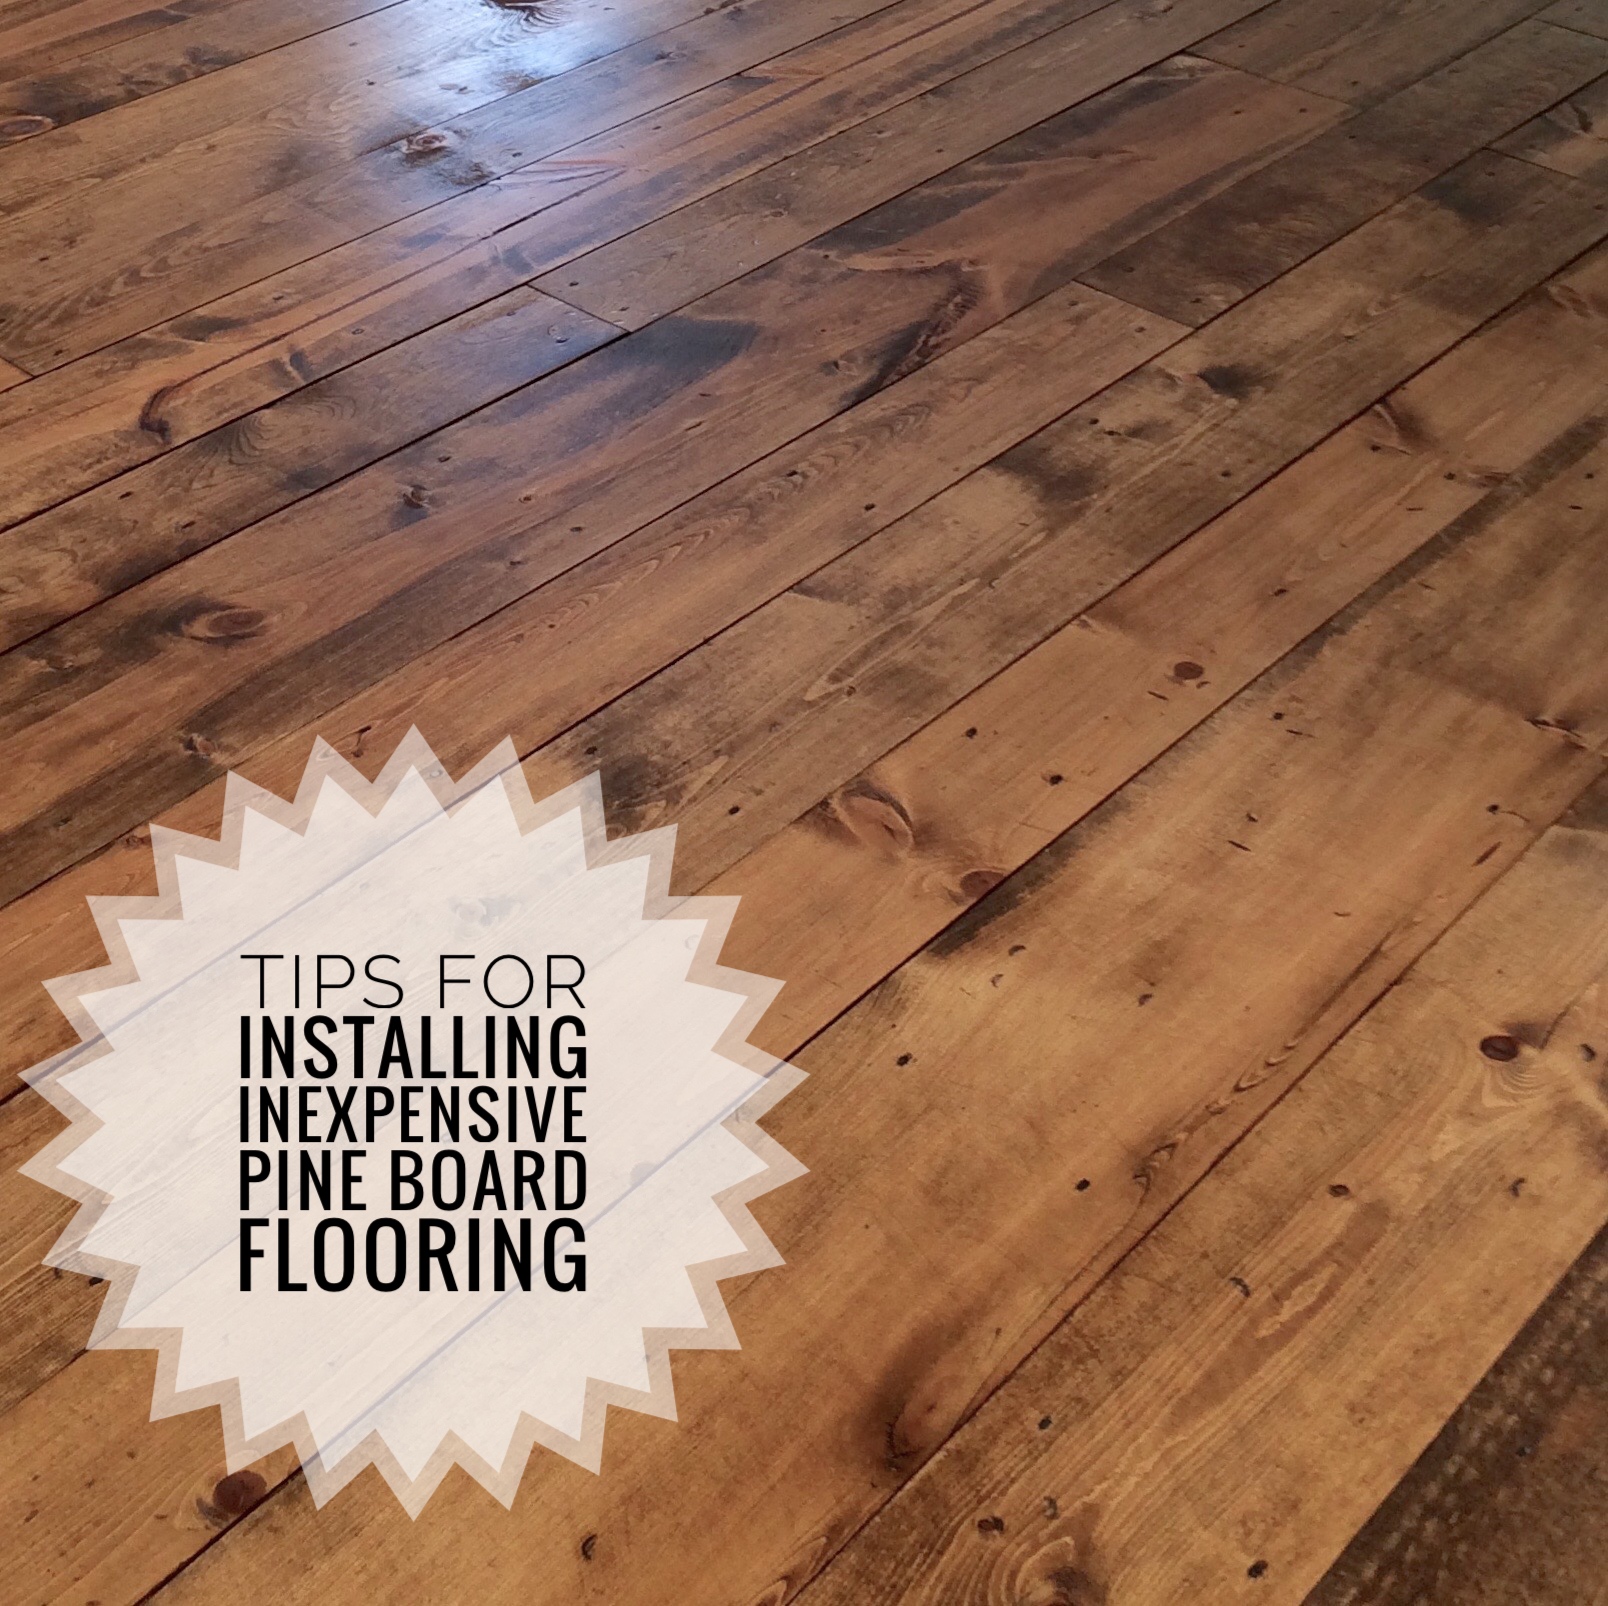 Inexpensive Wood Flooring Using Pine Boards All You Need To Know